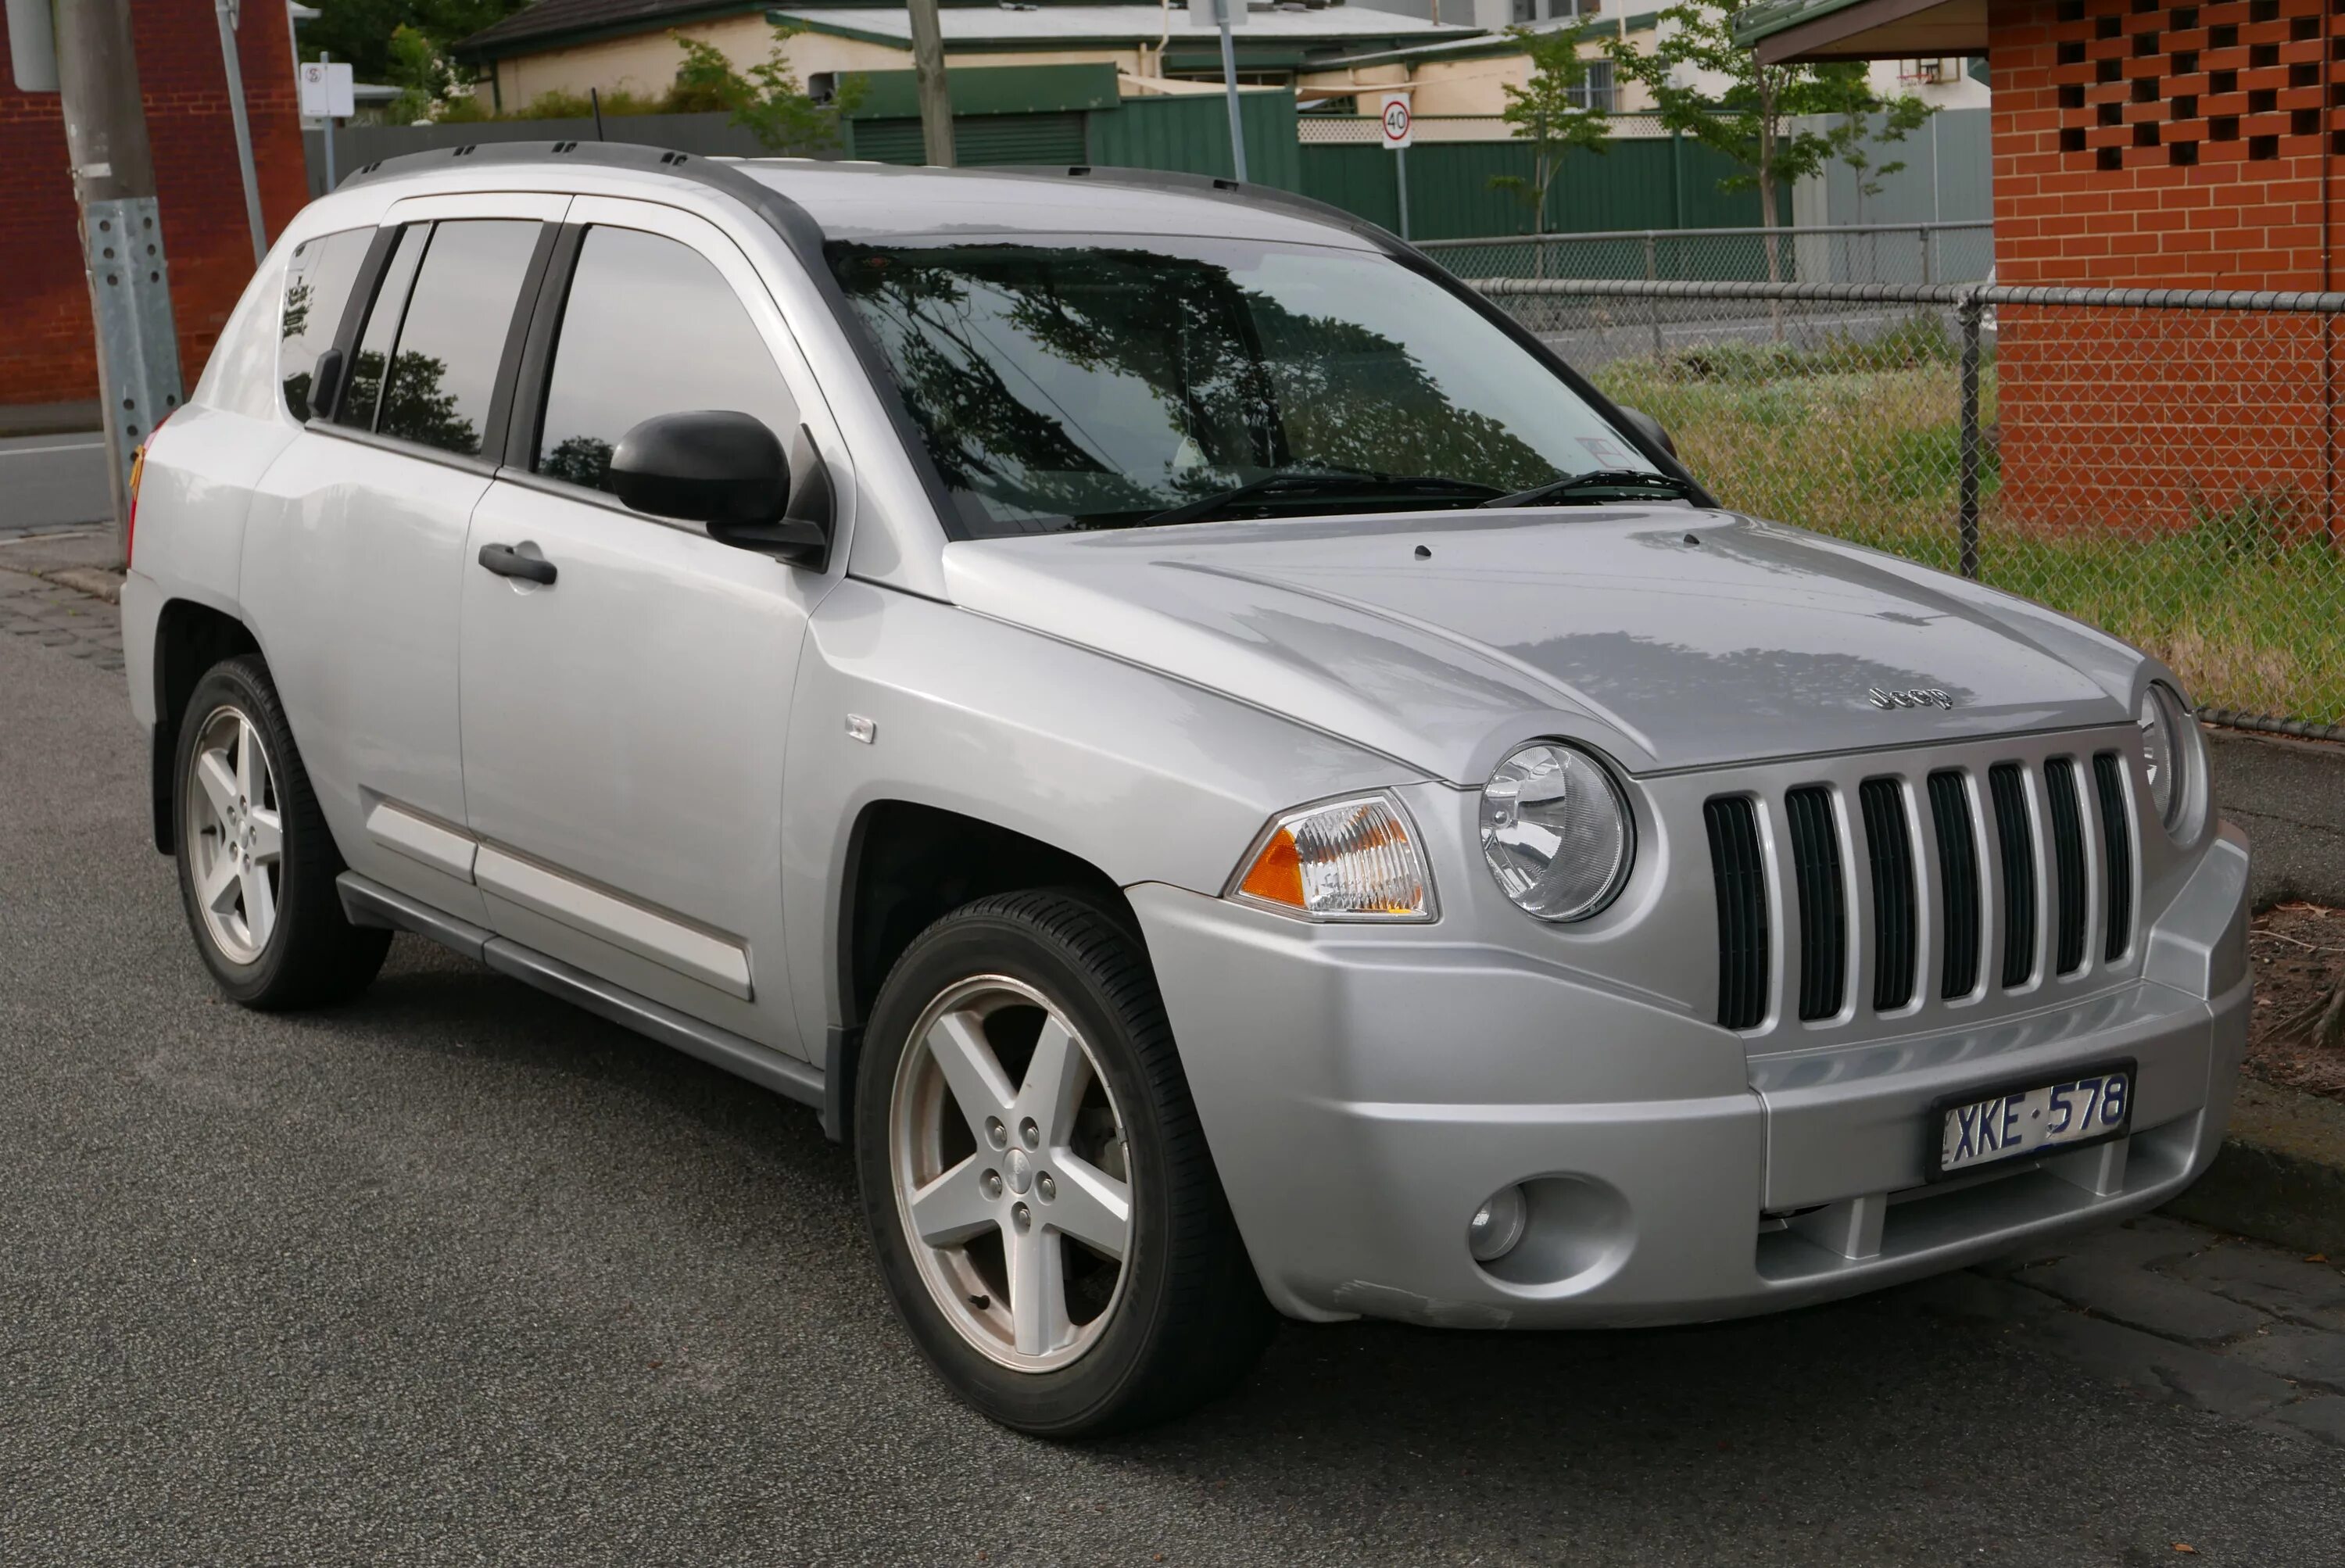 2006 г 2007 г 2008. Jeep Compass 2008. Jeep Compass 2007. Jeep Compass 2005. Jeep Compass Limited 2008.